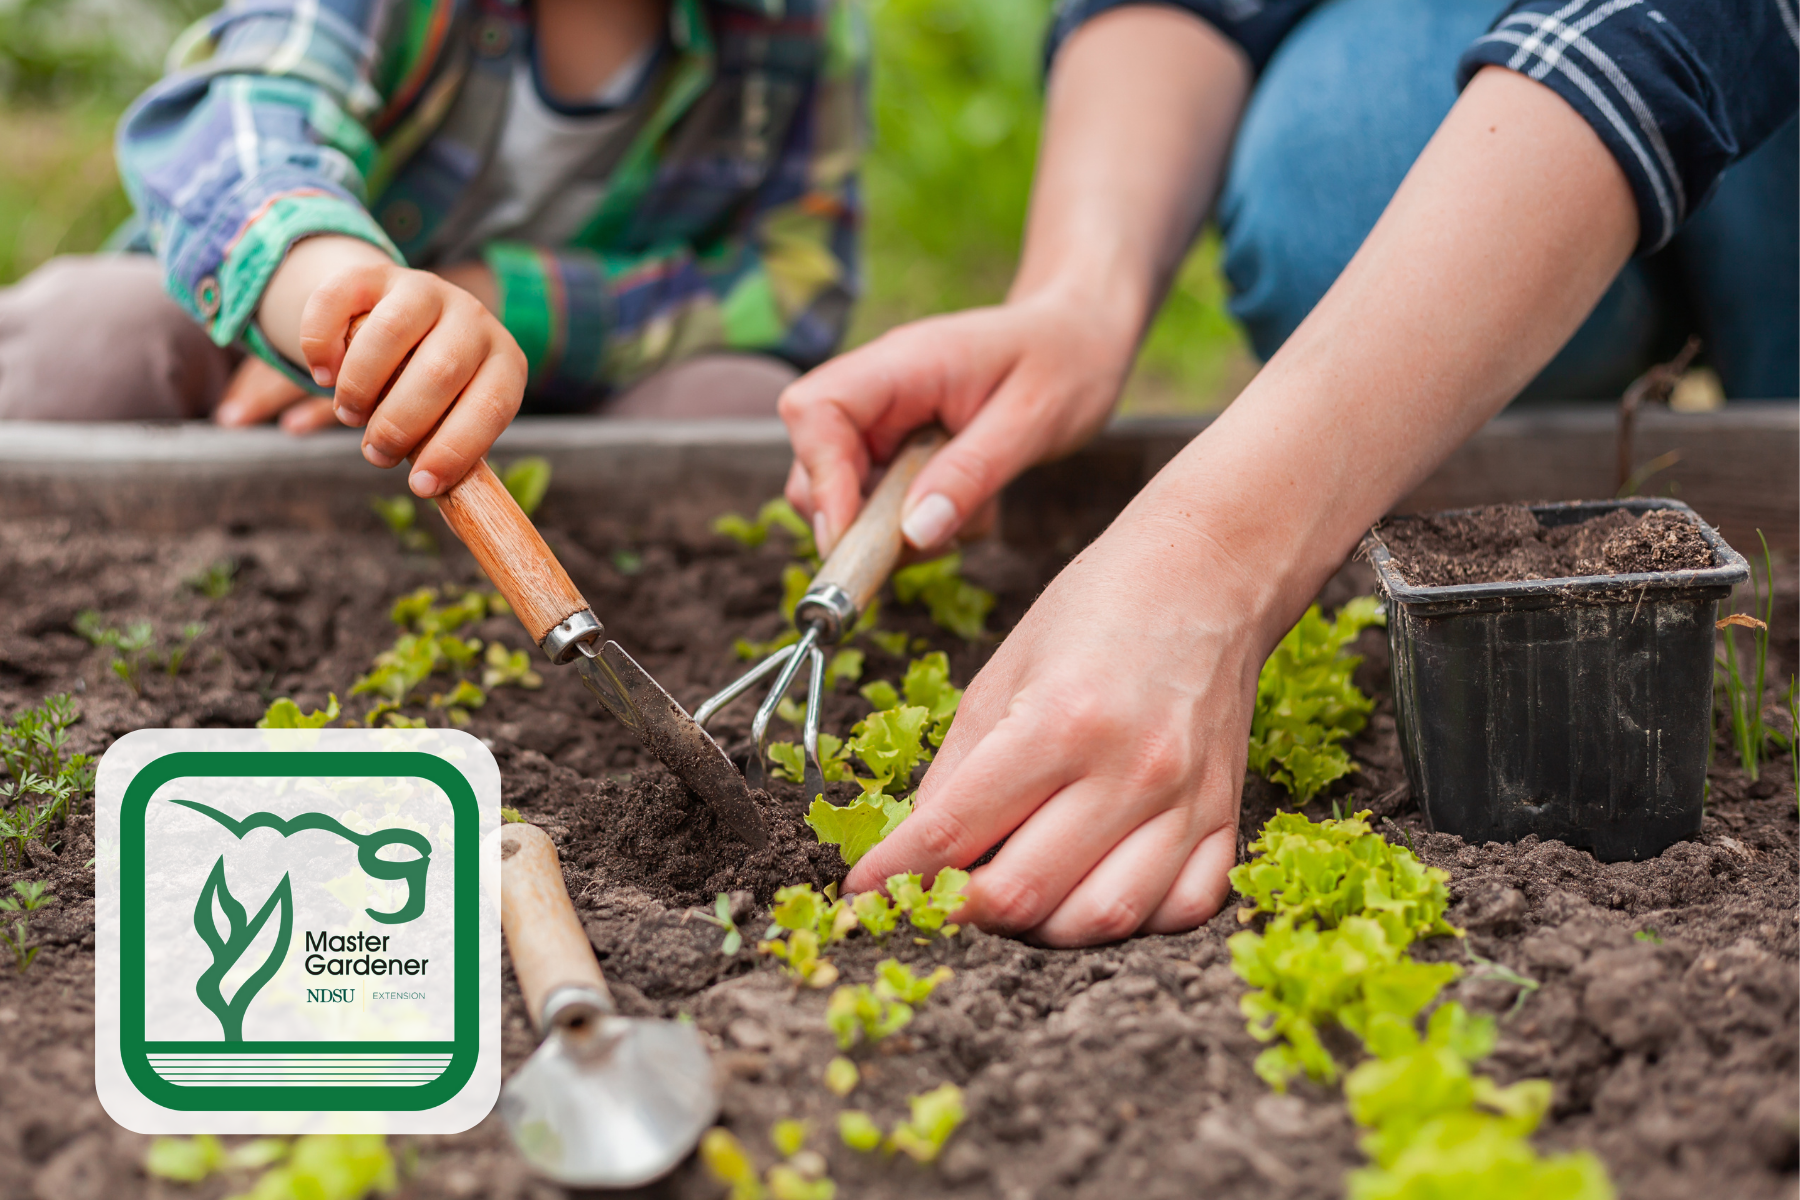 The NDSU Extension Master Gardener Program is a volunteer service organization that beautifies communities, educates the public about gardening, donates fresh produce to local food pantries and encourages pollinator conservation.